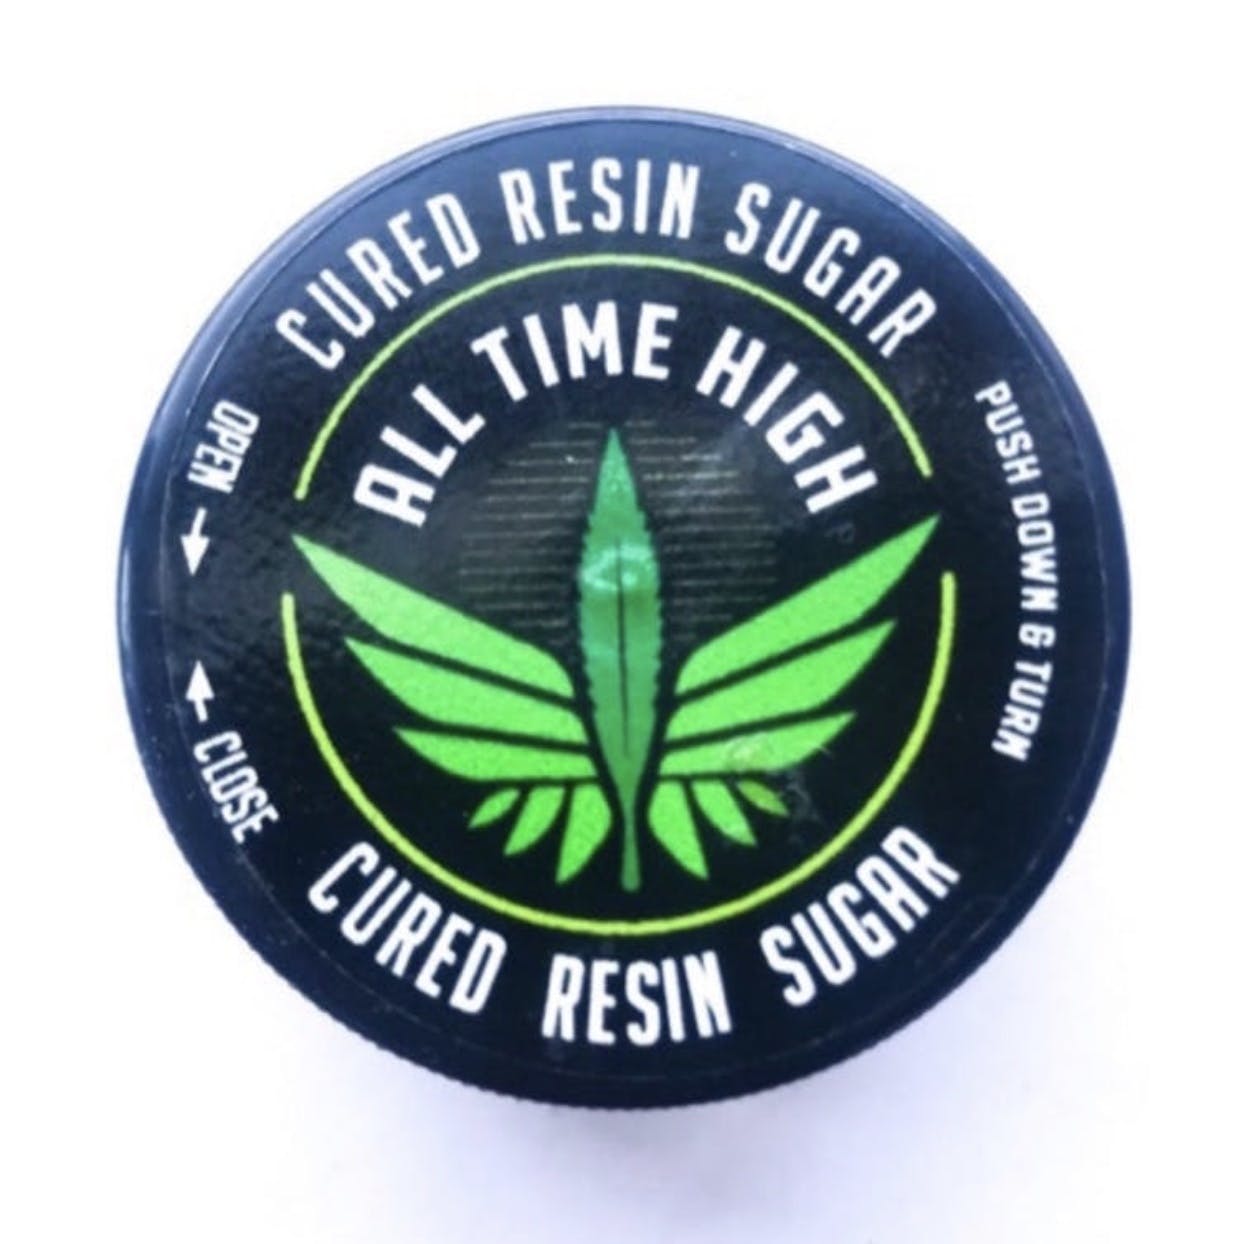 wax-all-time-high-cured-resin-sugar-5-for-160